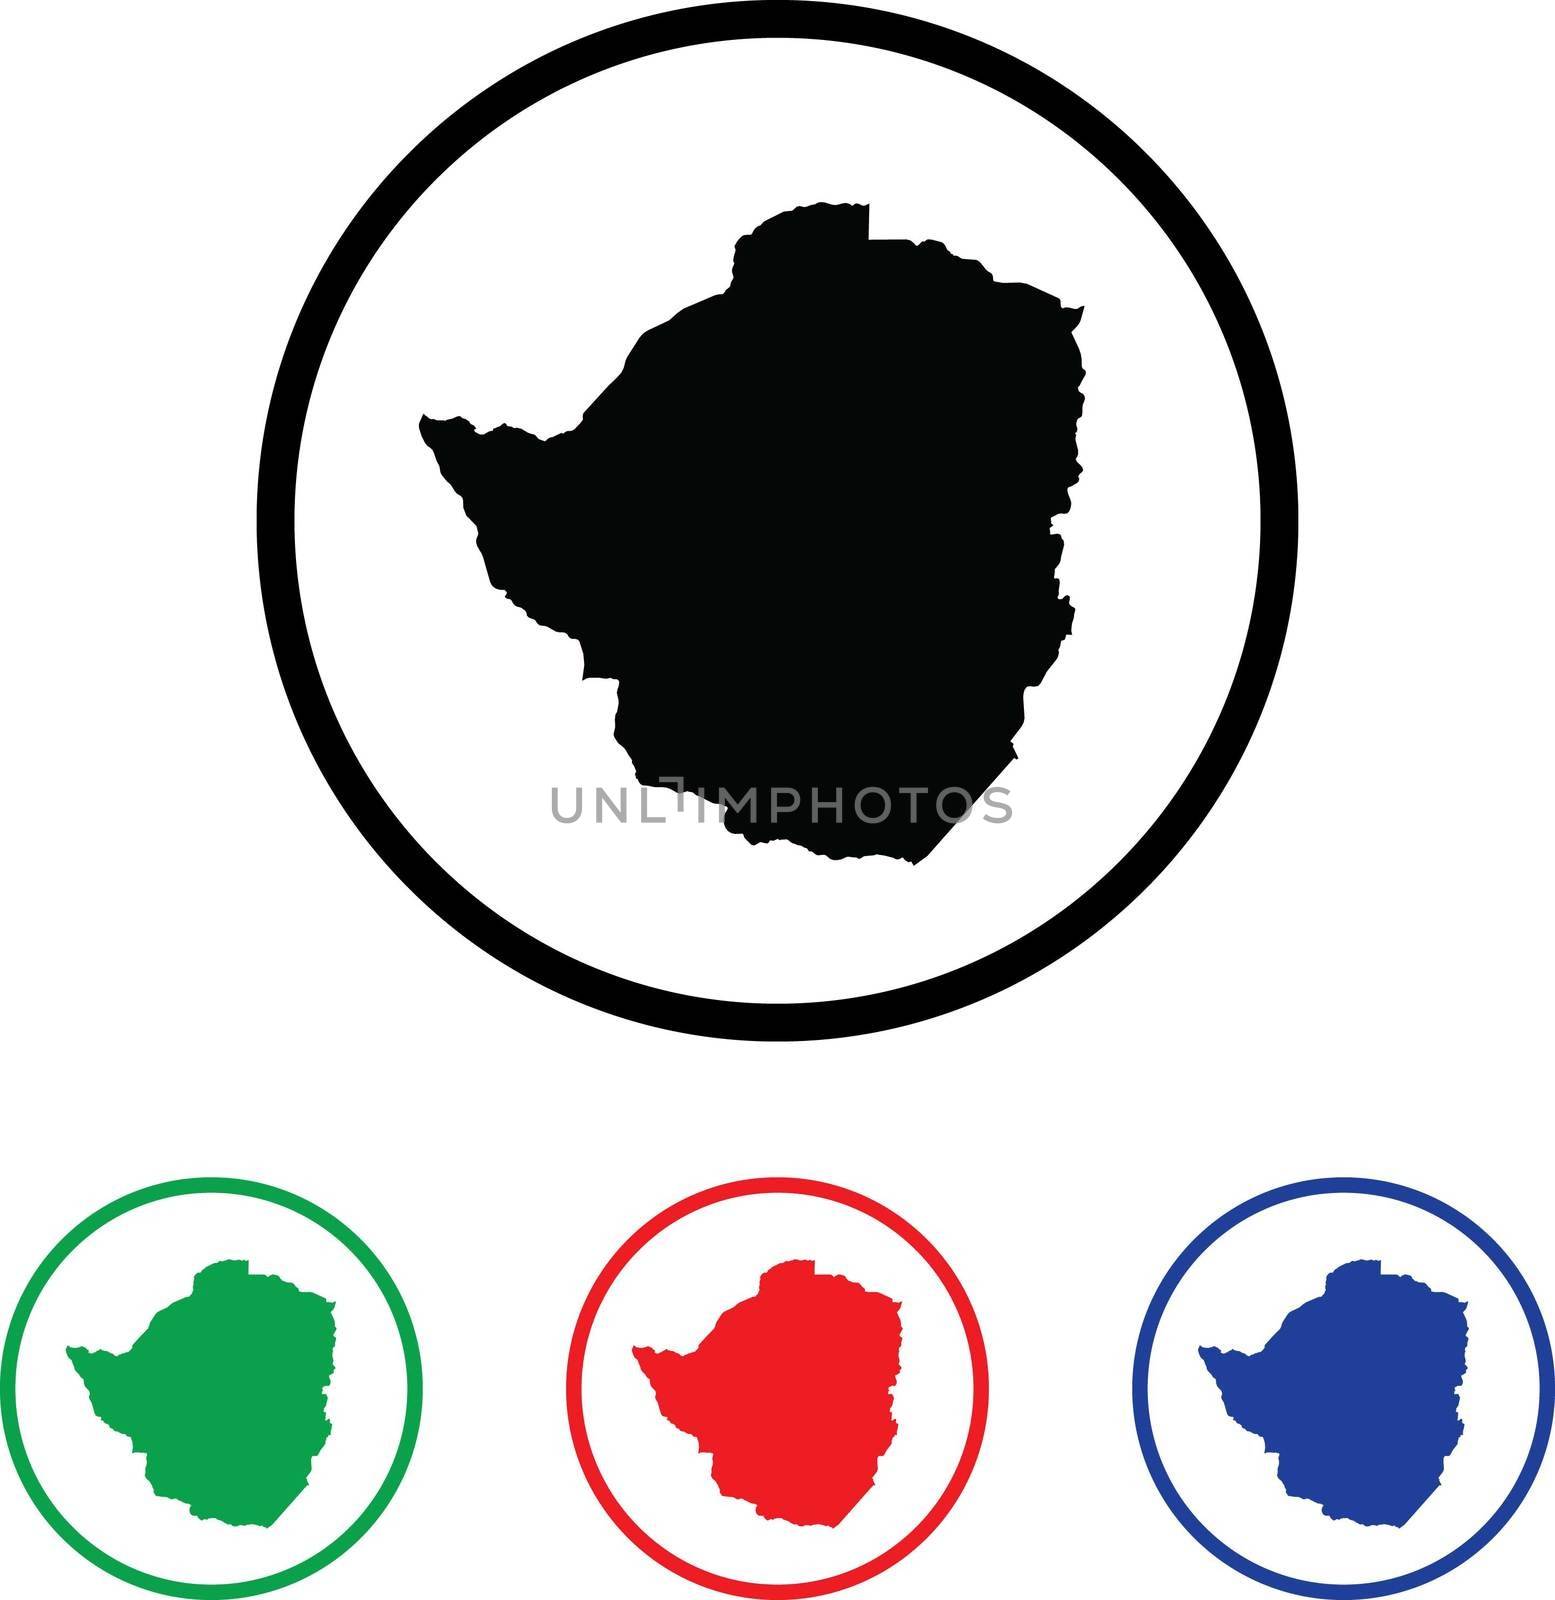 Zimbabwe Icon Illustration with Four Color Variations